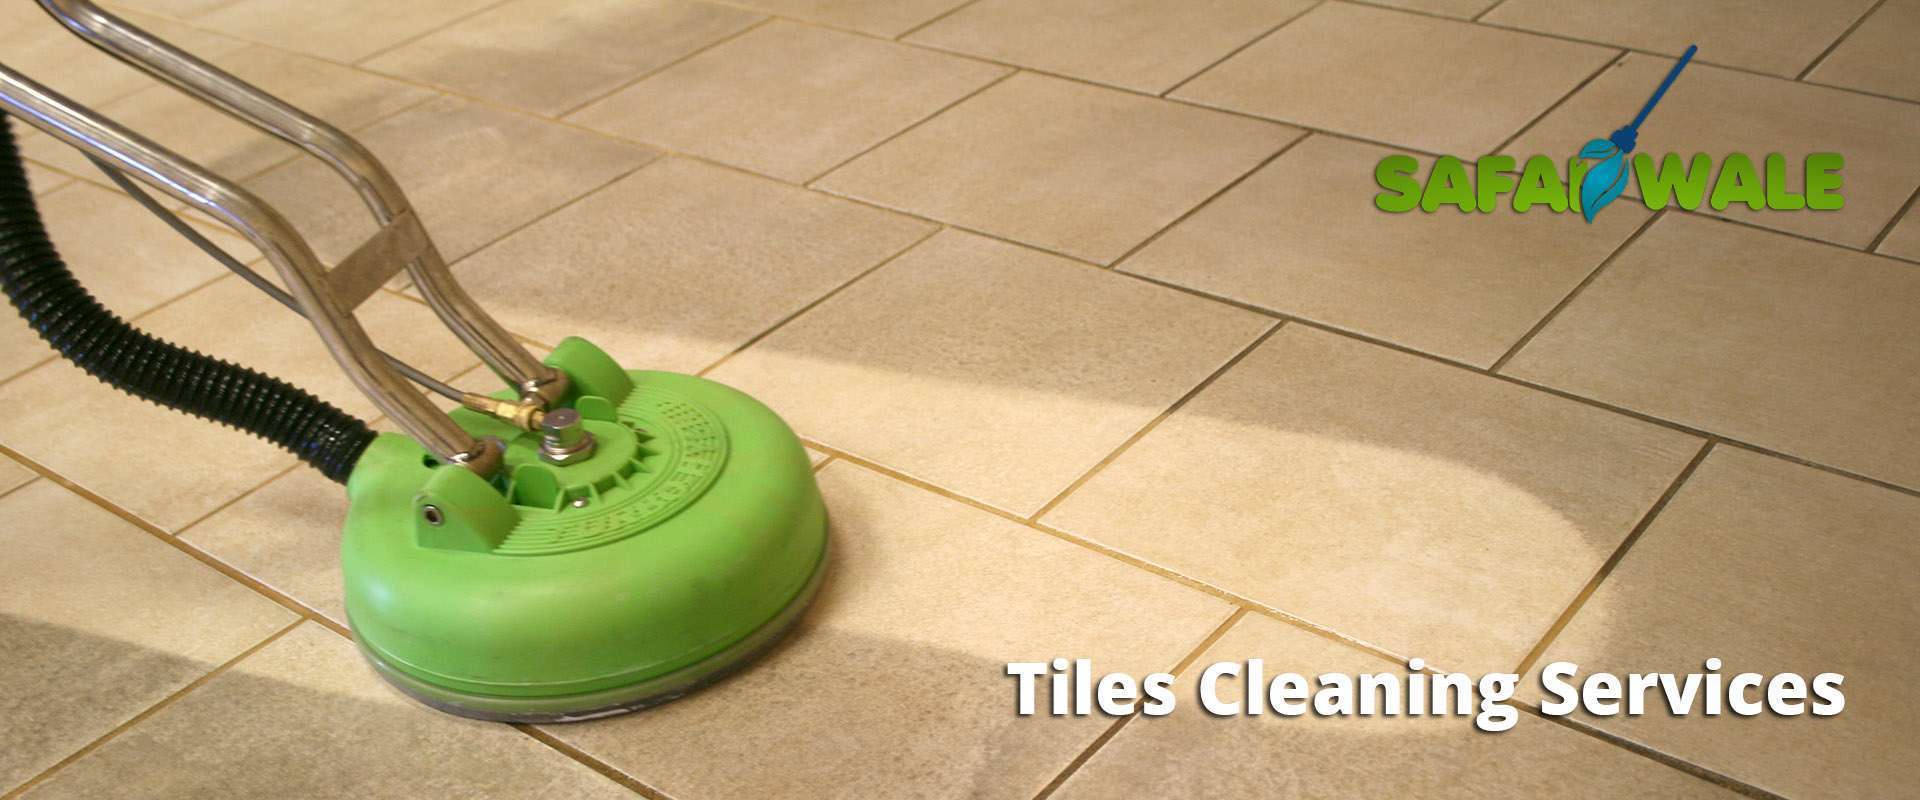 Tiles Cleaning Services In Gurgaon